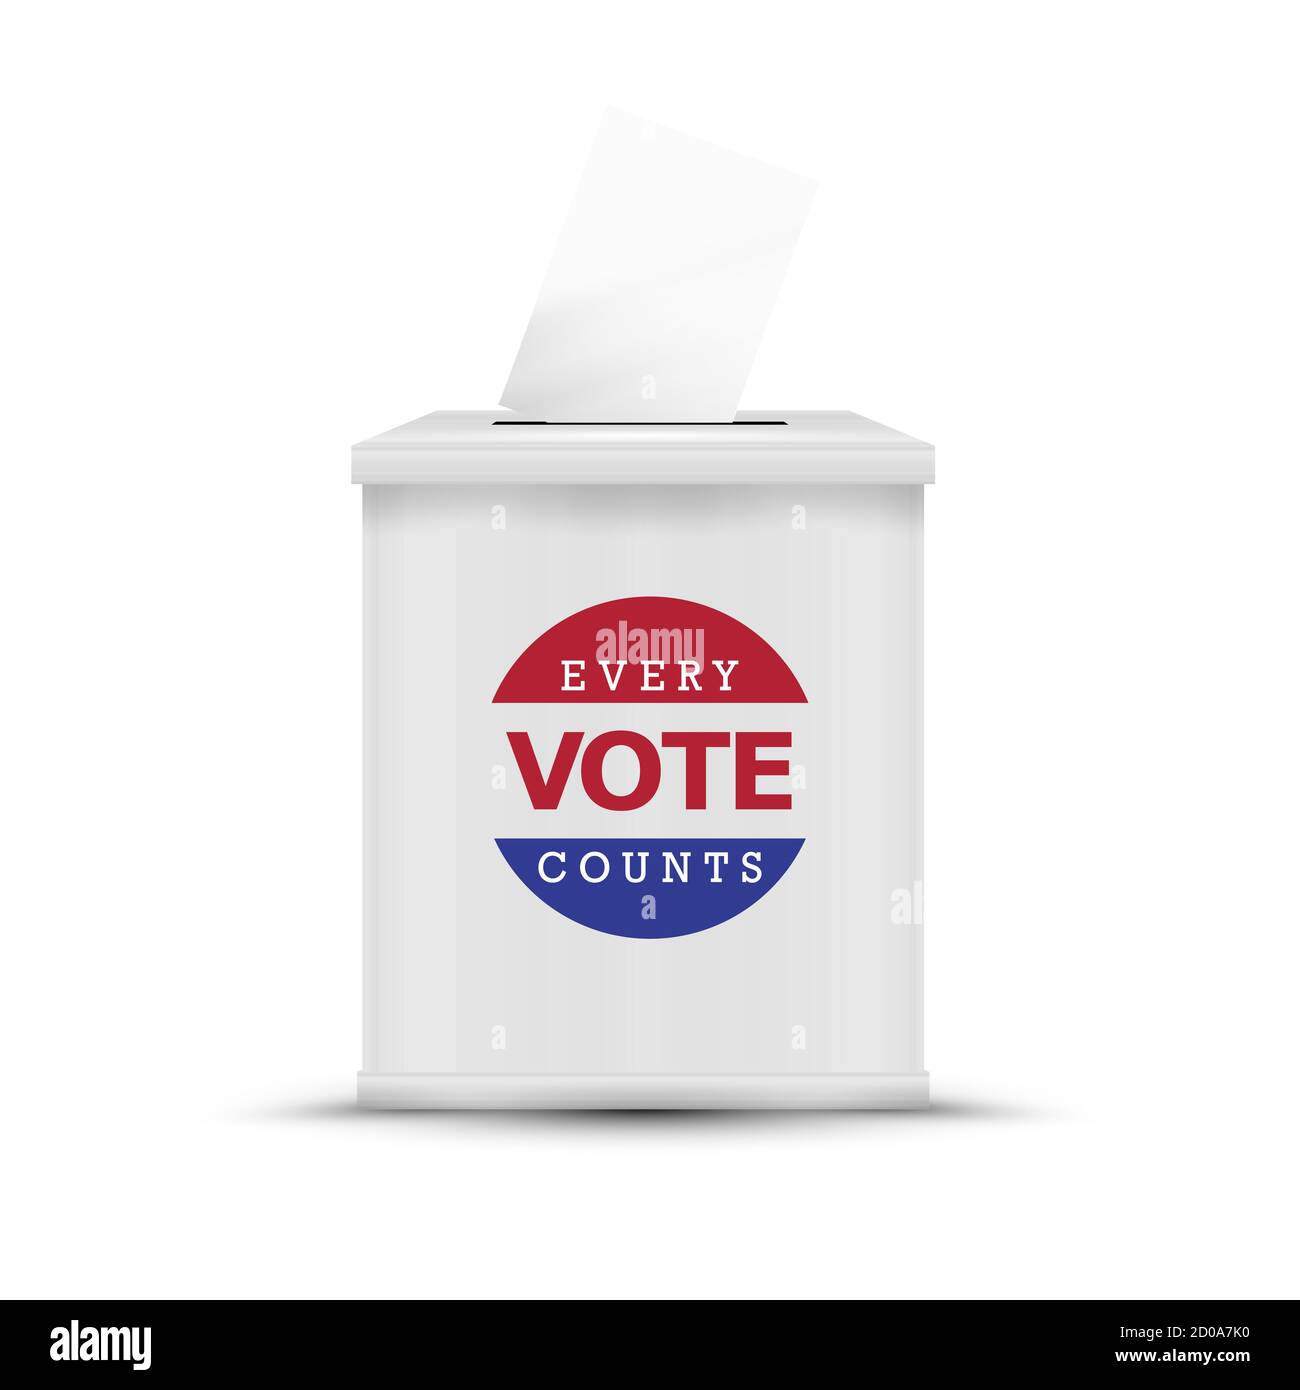 White ballot box isolated. Every vote counts. 2020 United States presidential election. illustration. Stock Photo